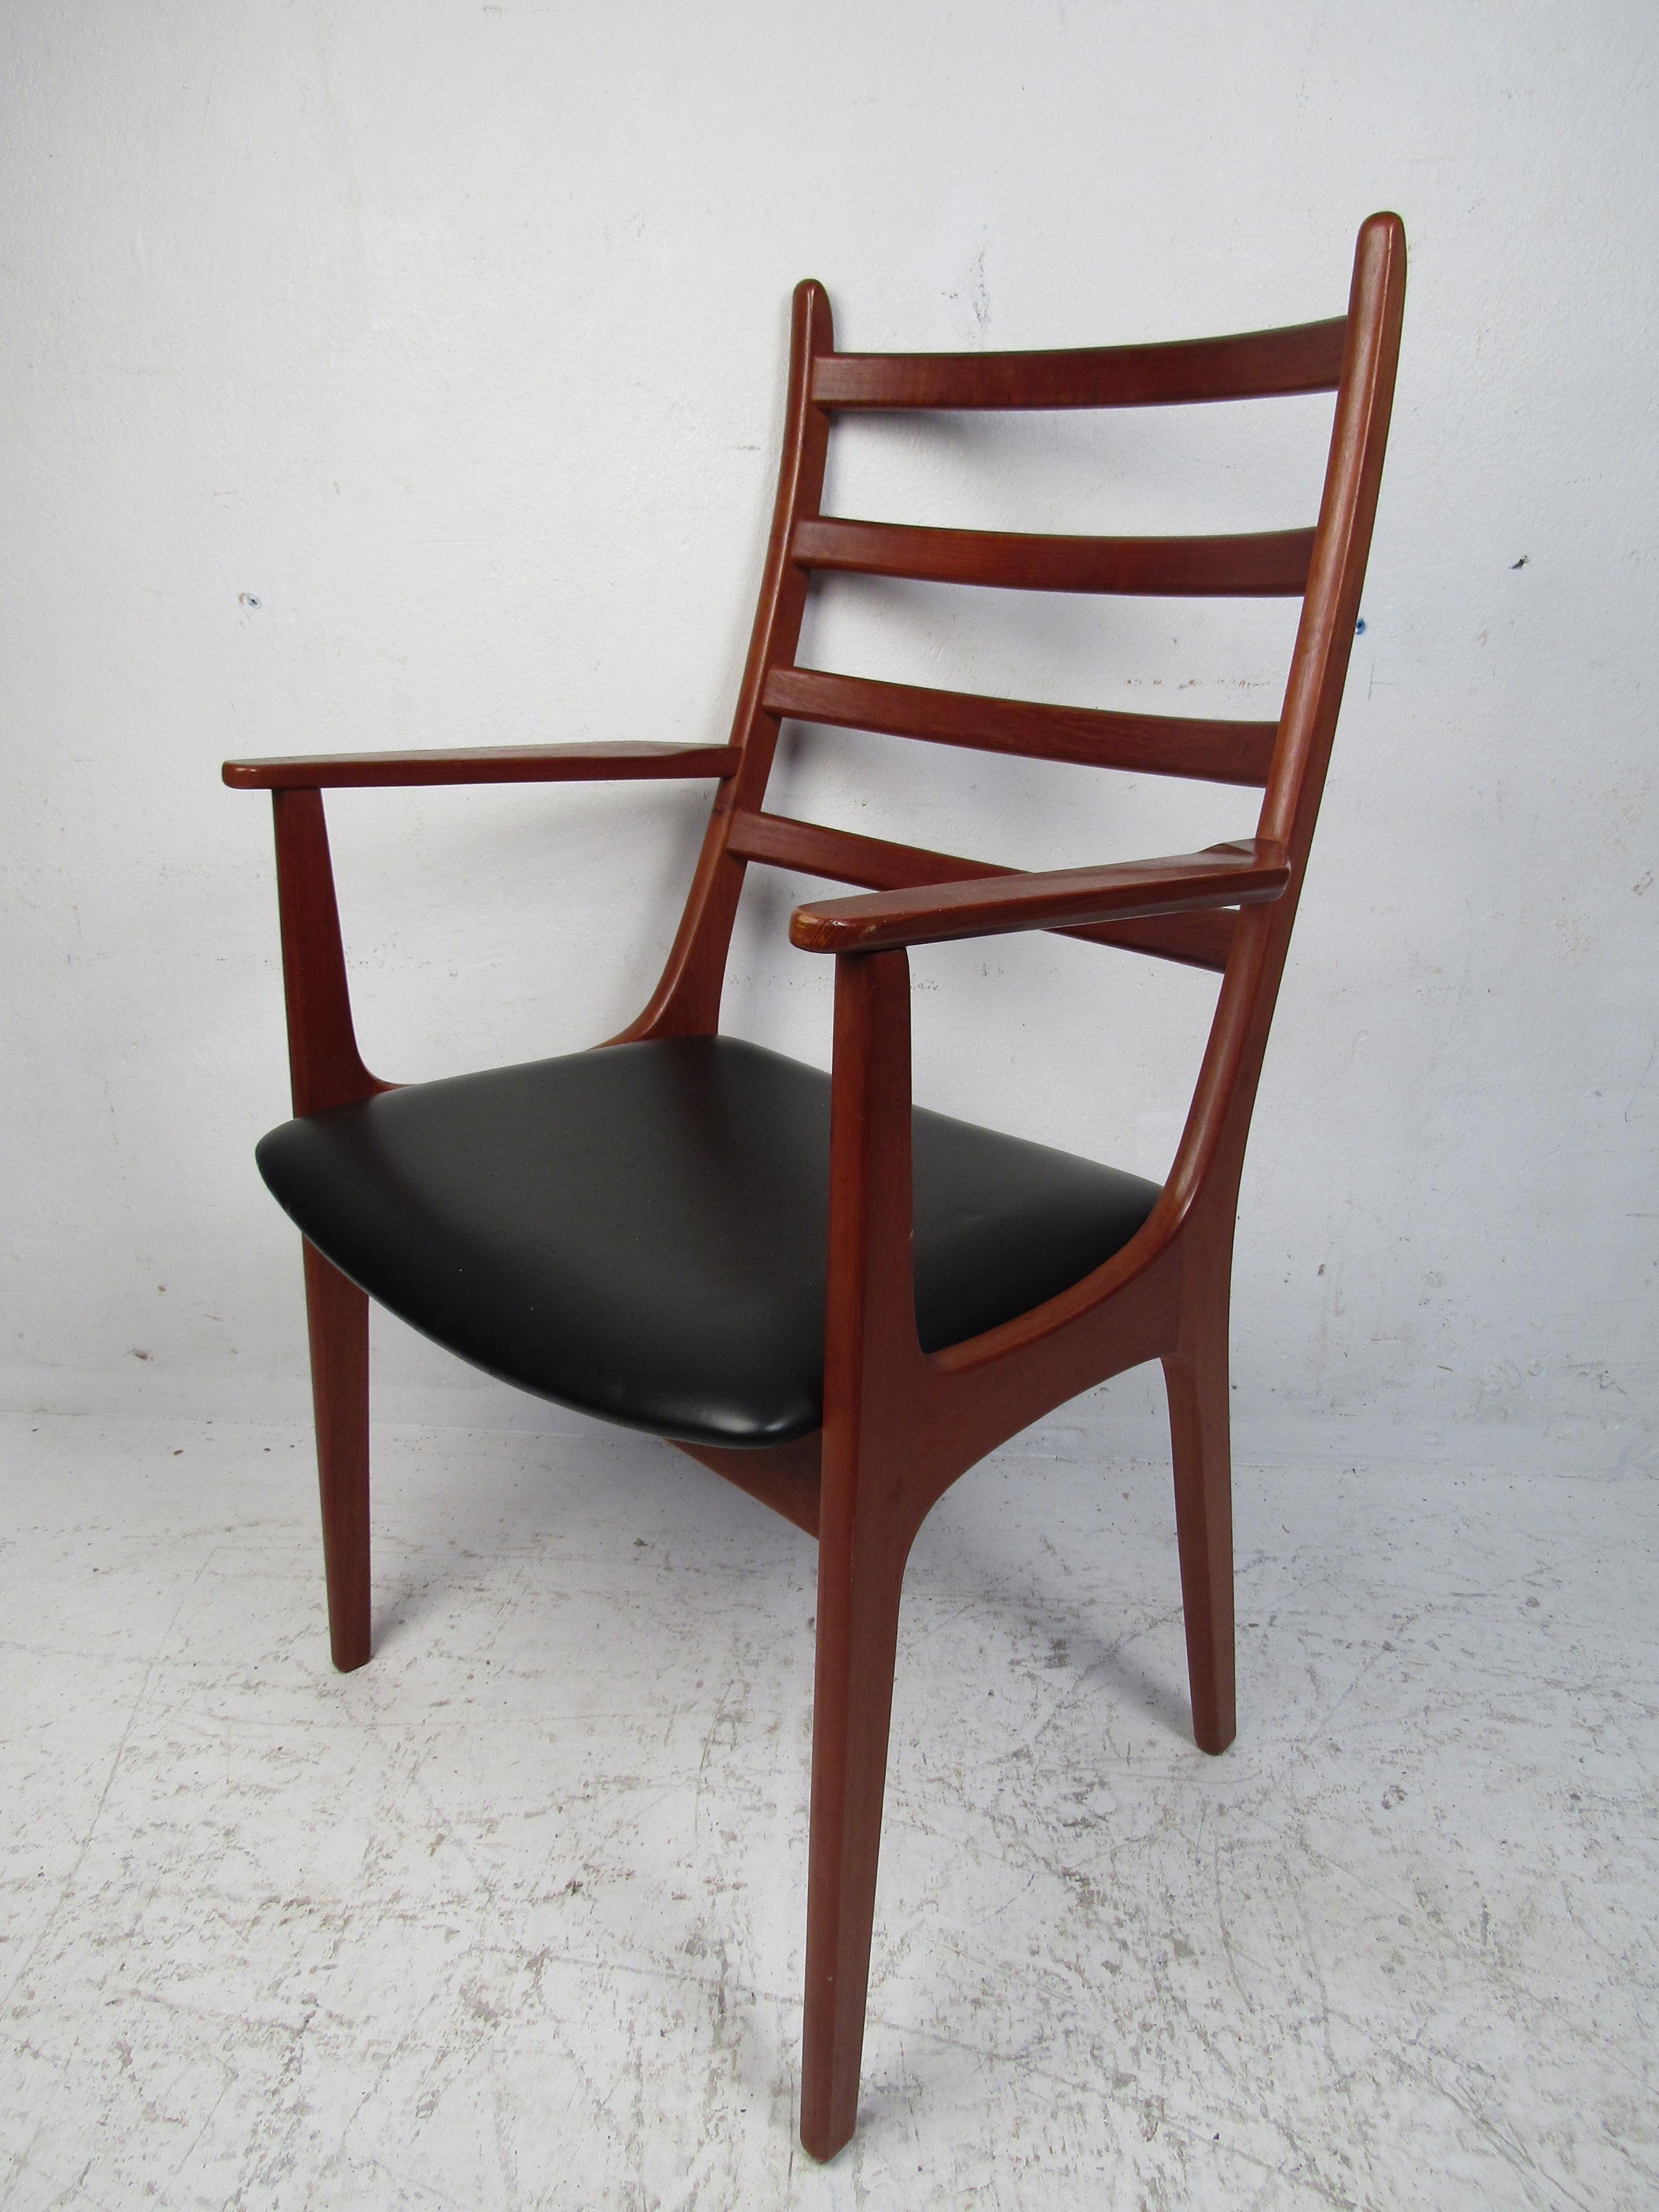 This stunning set of six Danish modern dining chairs boast a ladder backrest and a black vinyl seat. A sturdy frame that ensures comfort with rich teak wood grain. This set includes two armchairs and four slipper chairs. The perfect addition to any